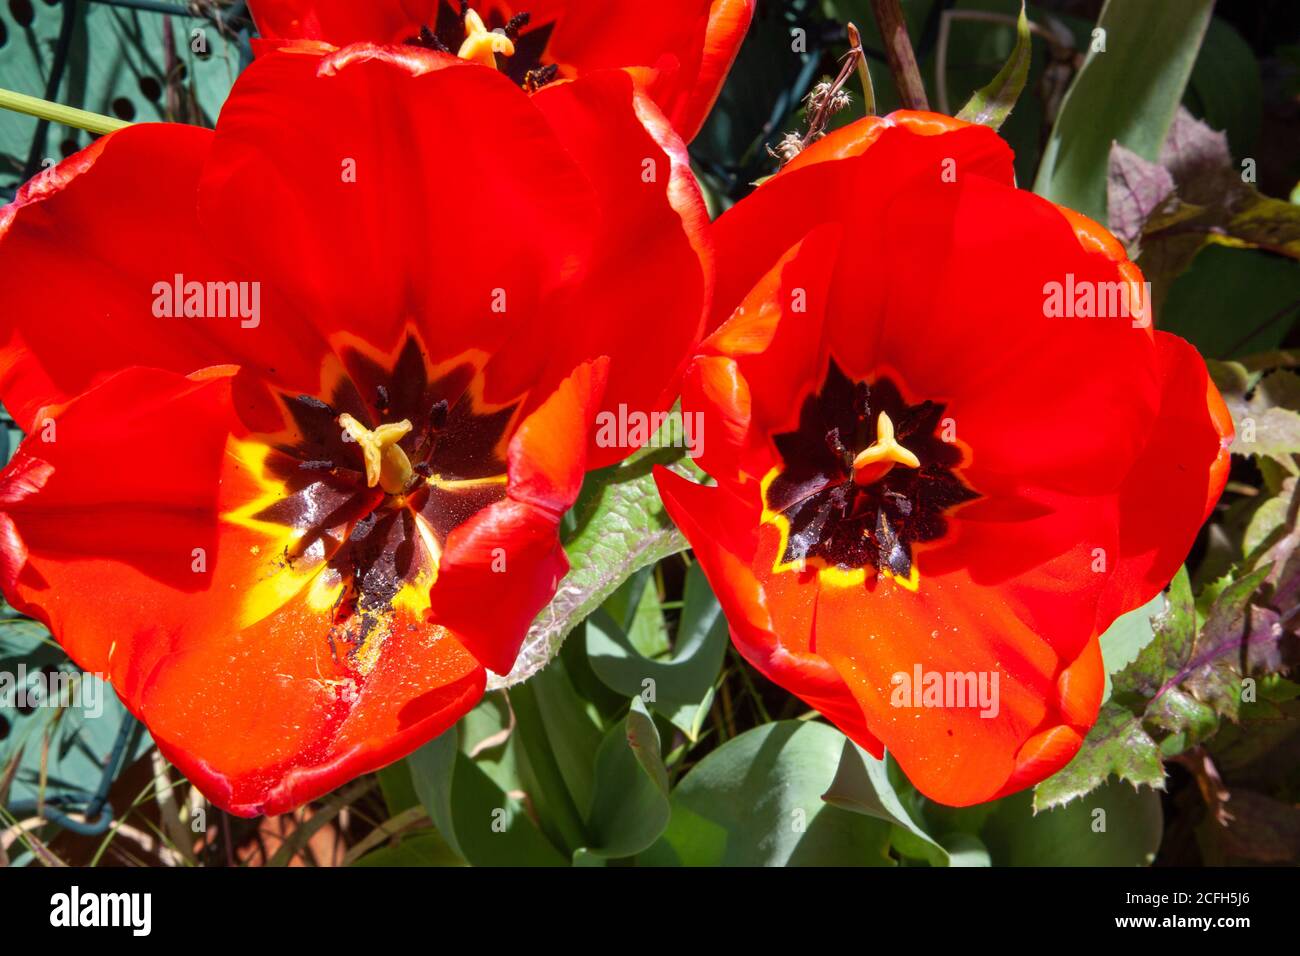 brilliant red poppies in a garden Stock Photo